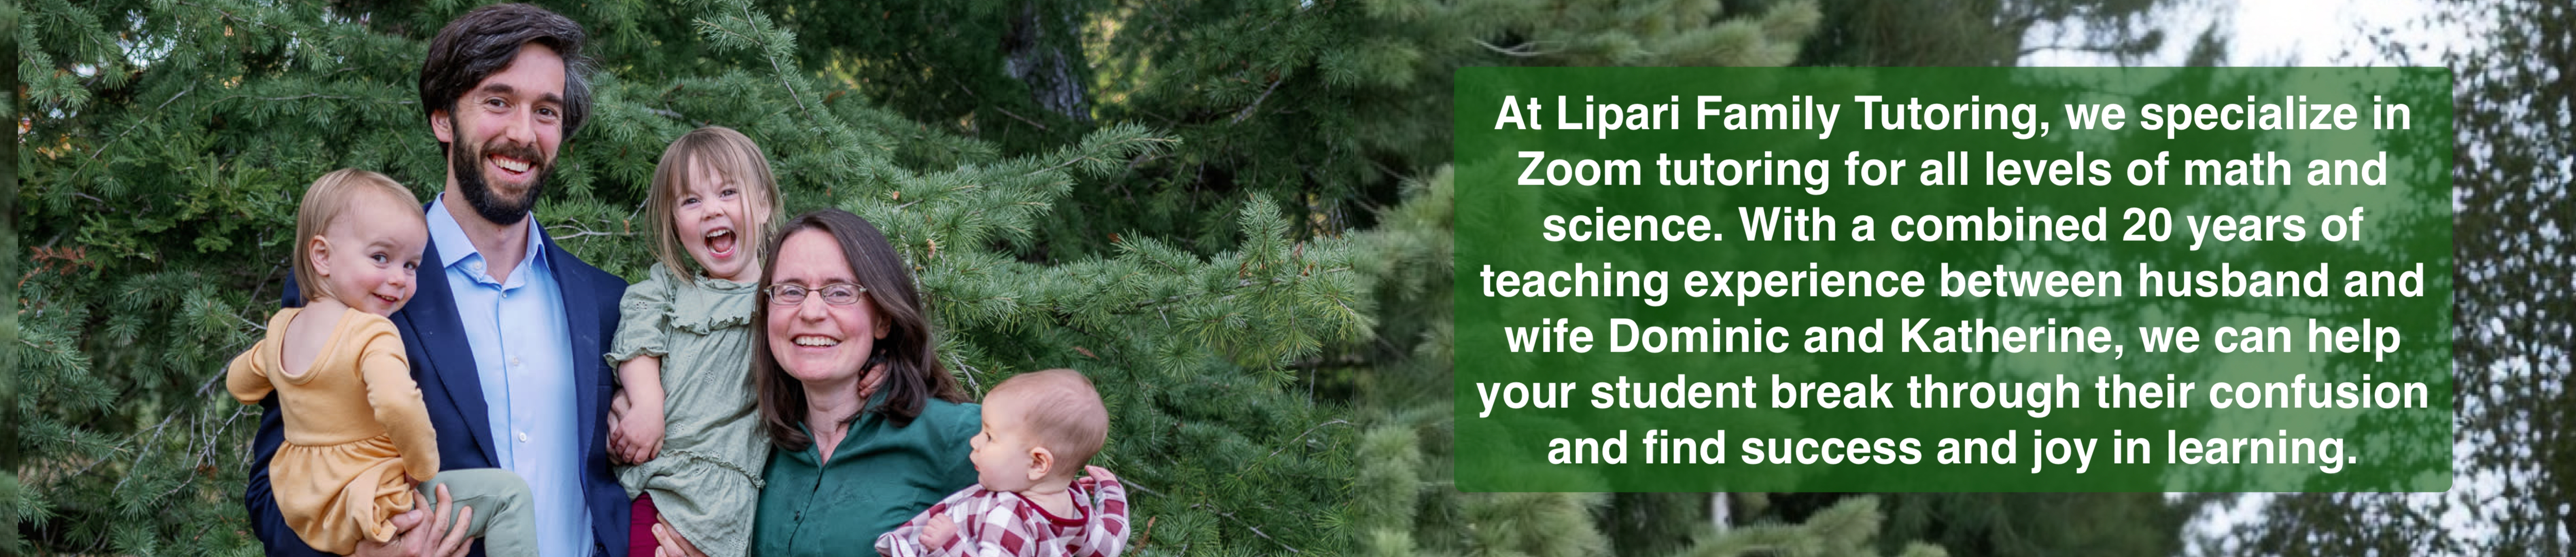 At Lipari Family Tutoring, we specialize in Zoom tutoring for all levels of math and science.  With a combined 20 years of teaching experience between husband and wife Dominic and Katherine, we can help your student break through their confusion and find success and joy in learning.